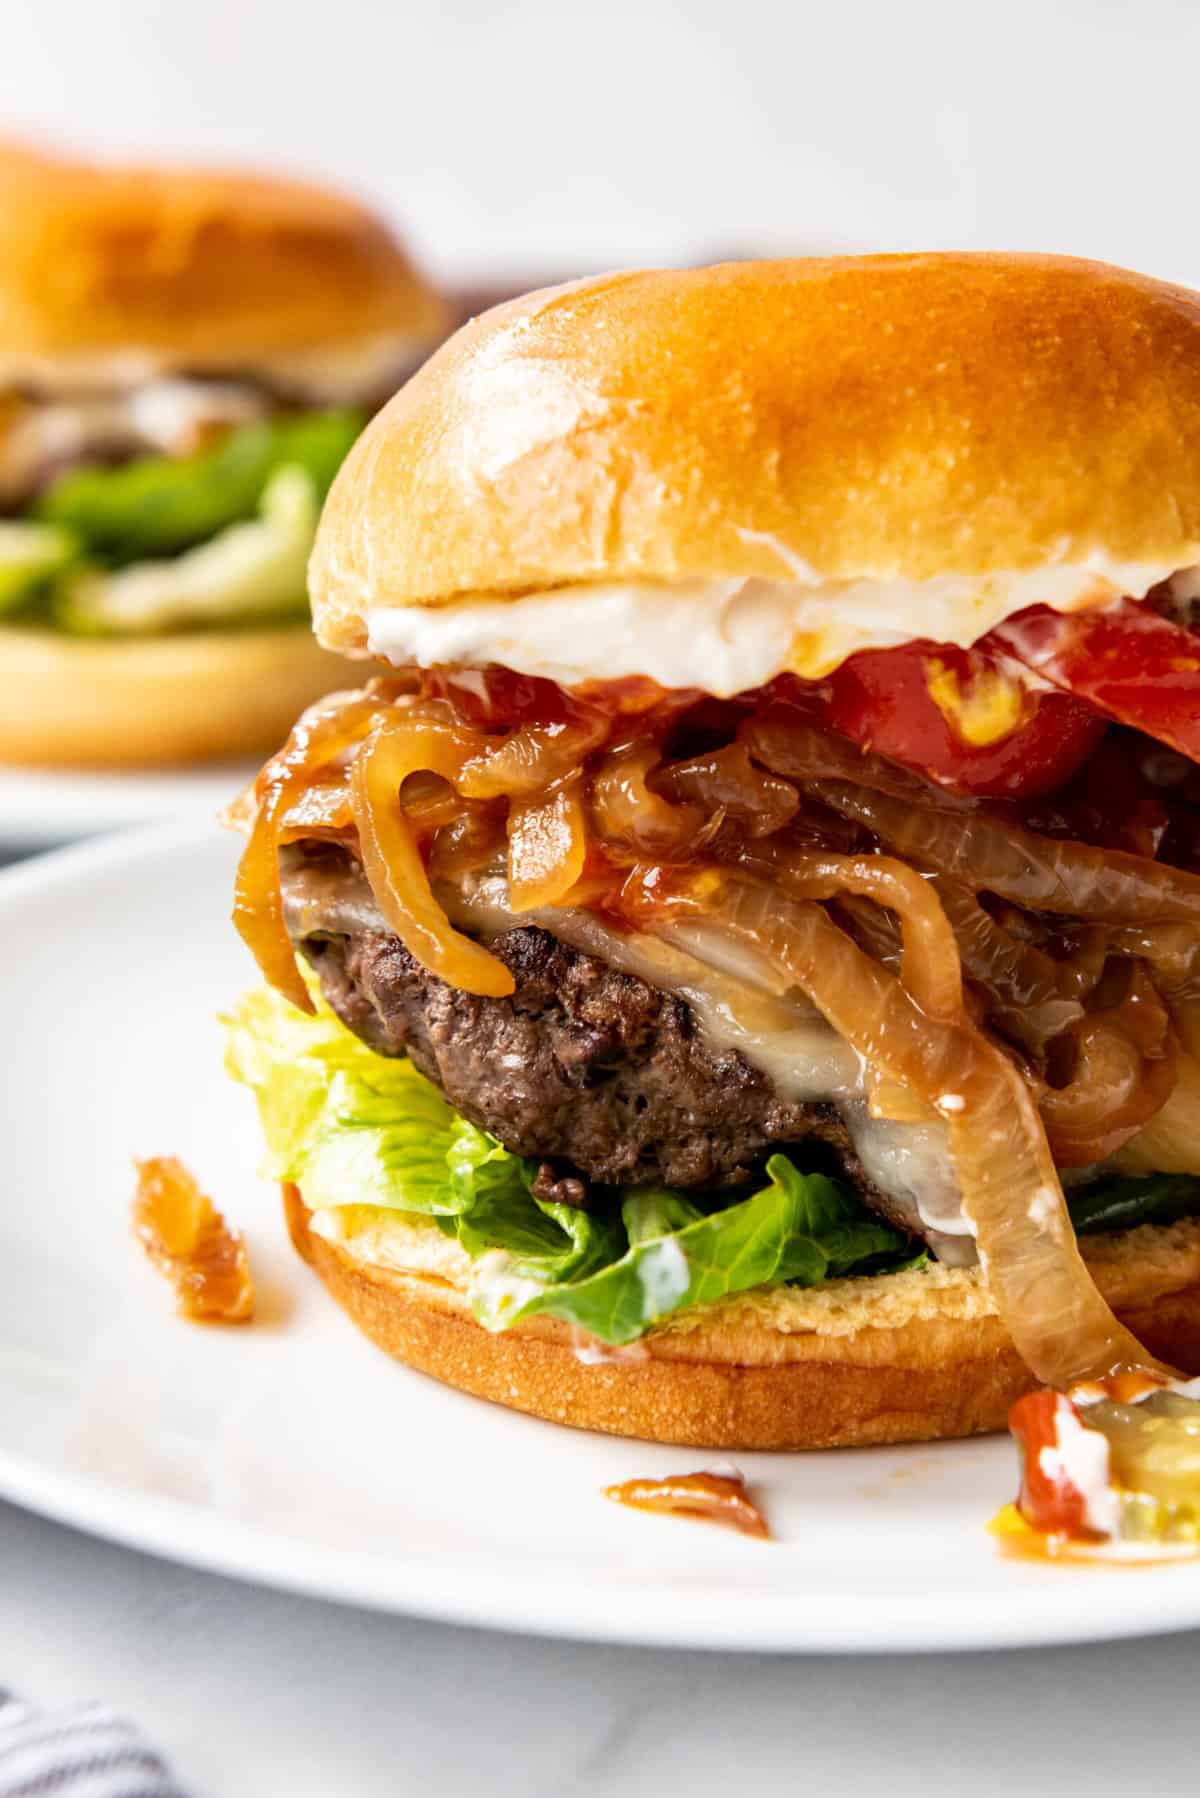 A close image of a juicy bison burger with caramelized onions.